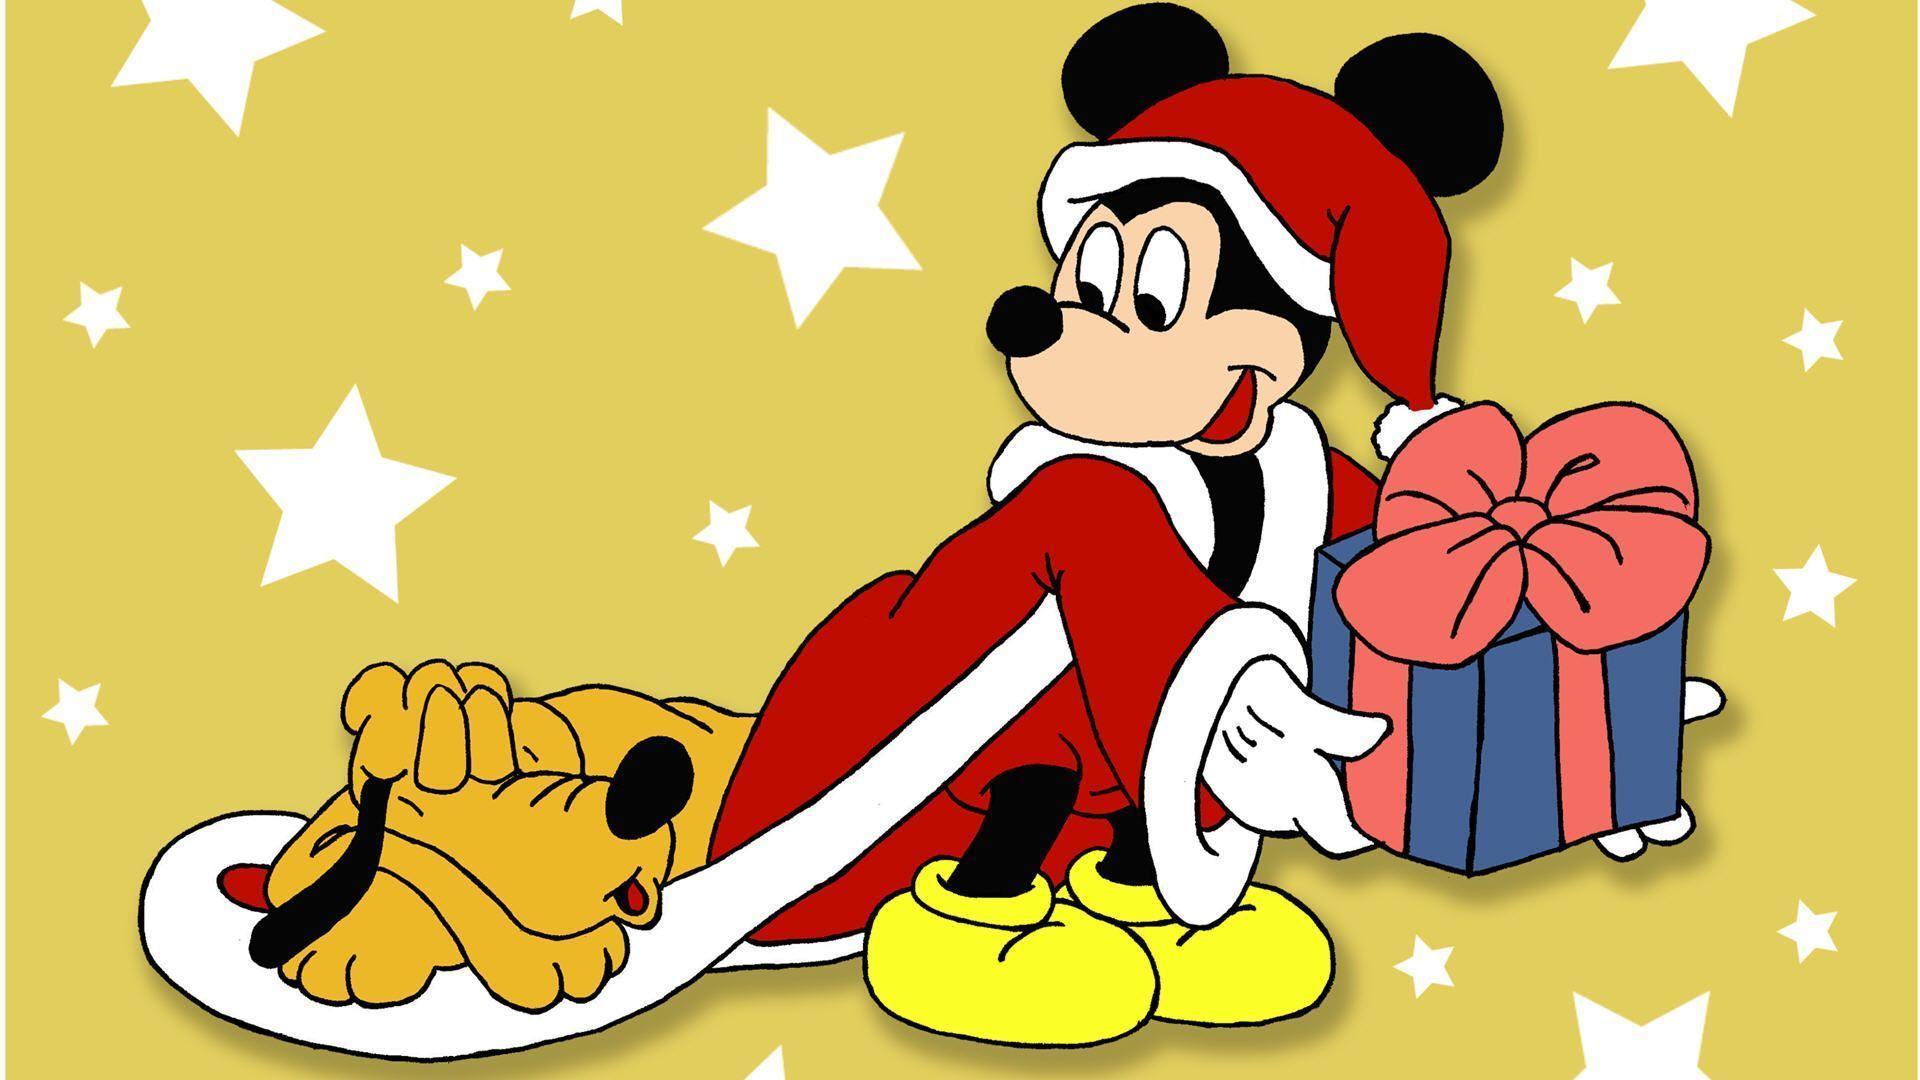 Baby Mickey Mouse Christmas Wallpaper Image & Picture